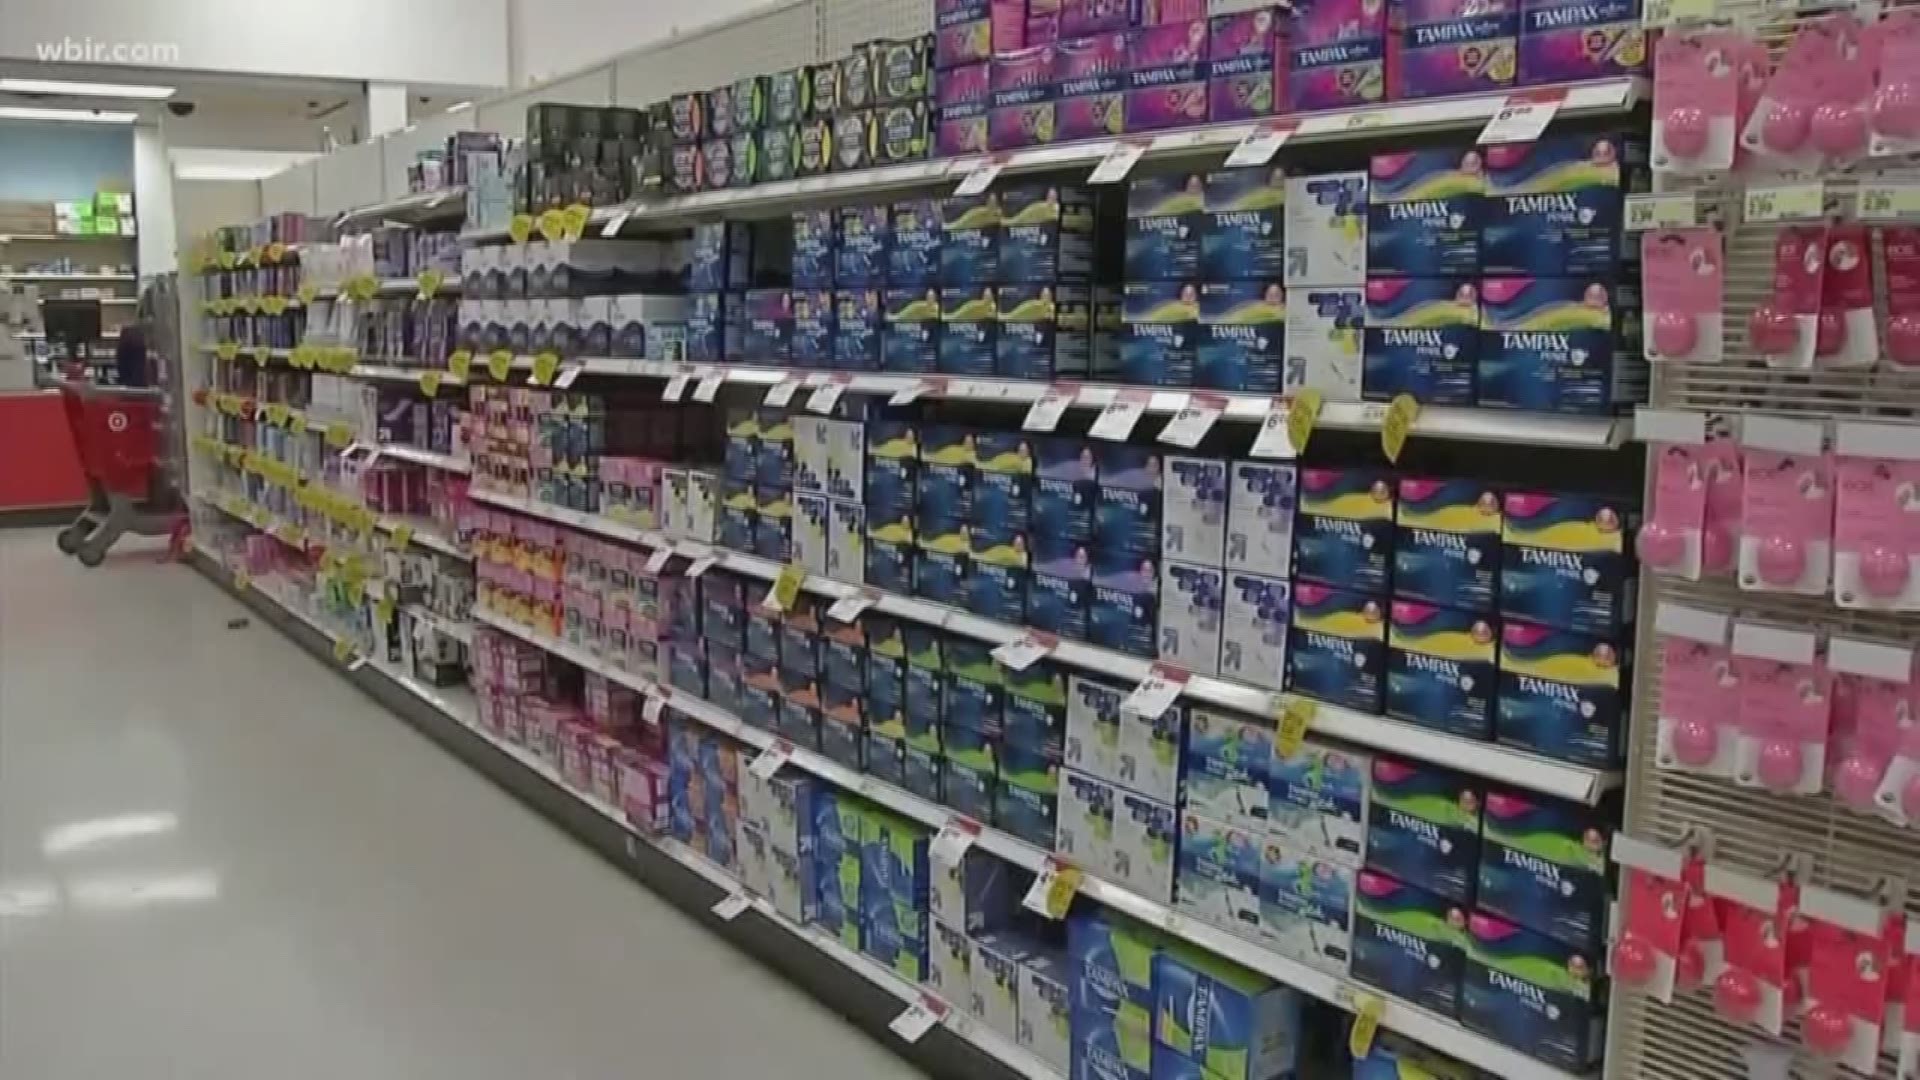 A new bill would require schools to offer free feminine hygiene products to students.